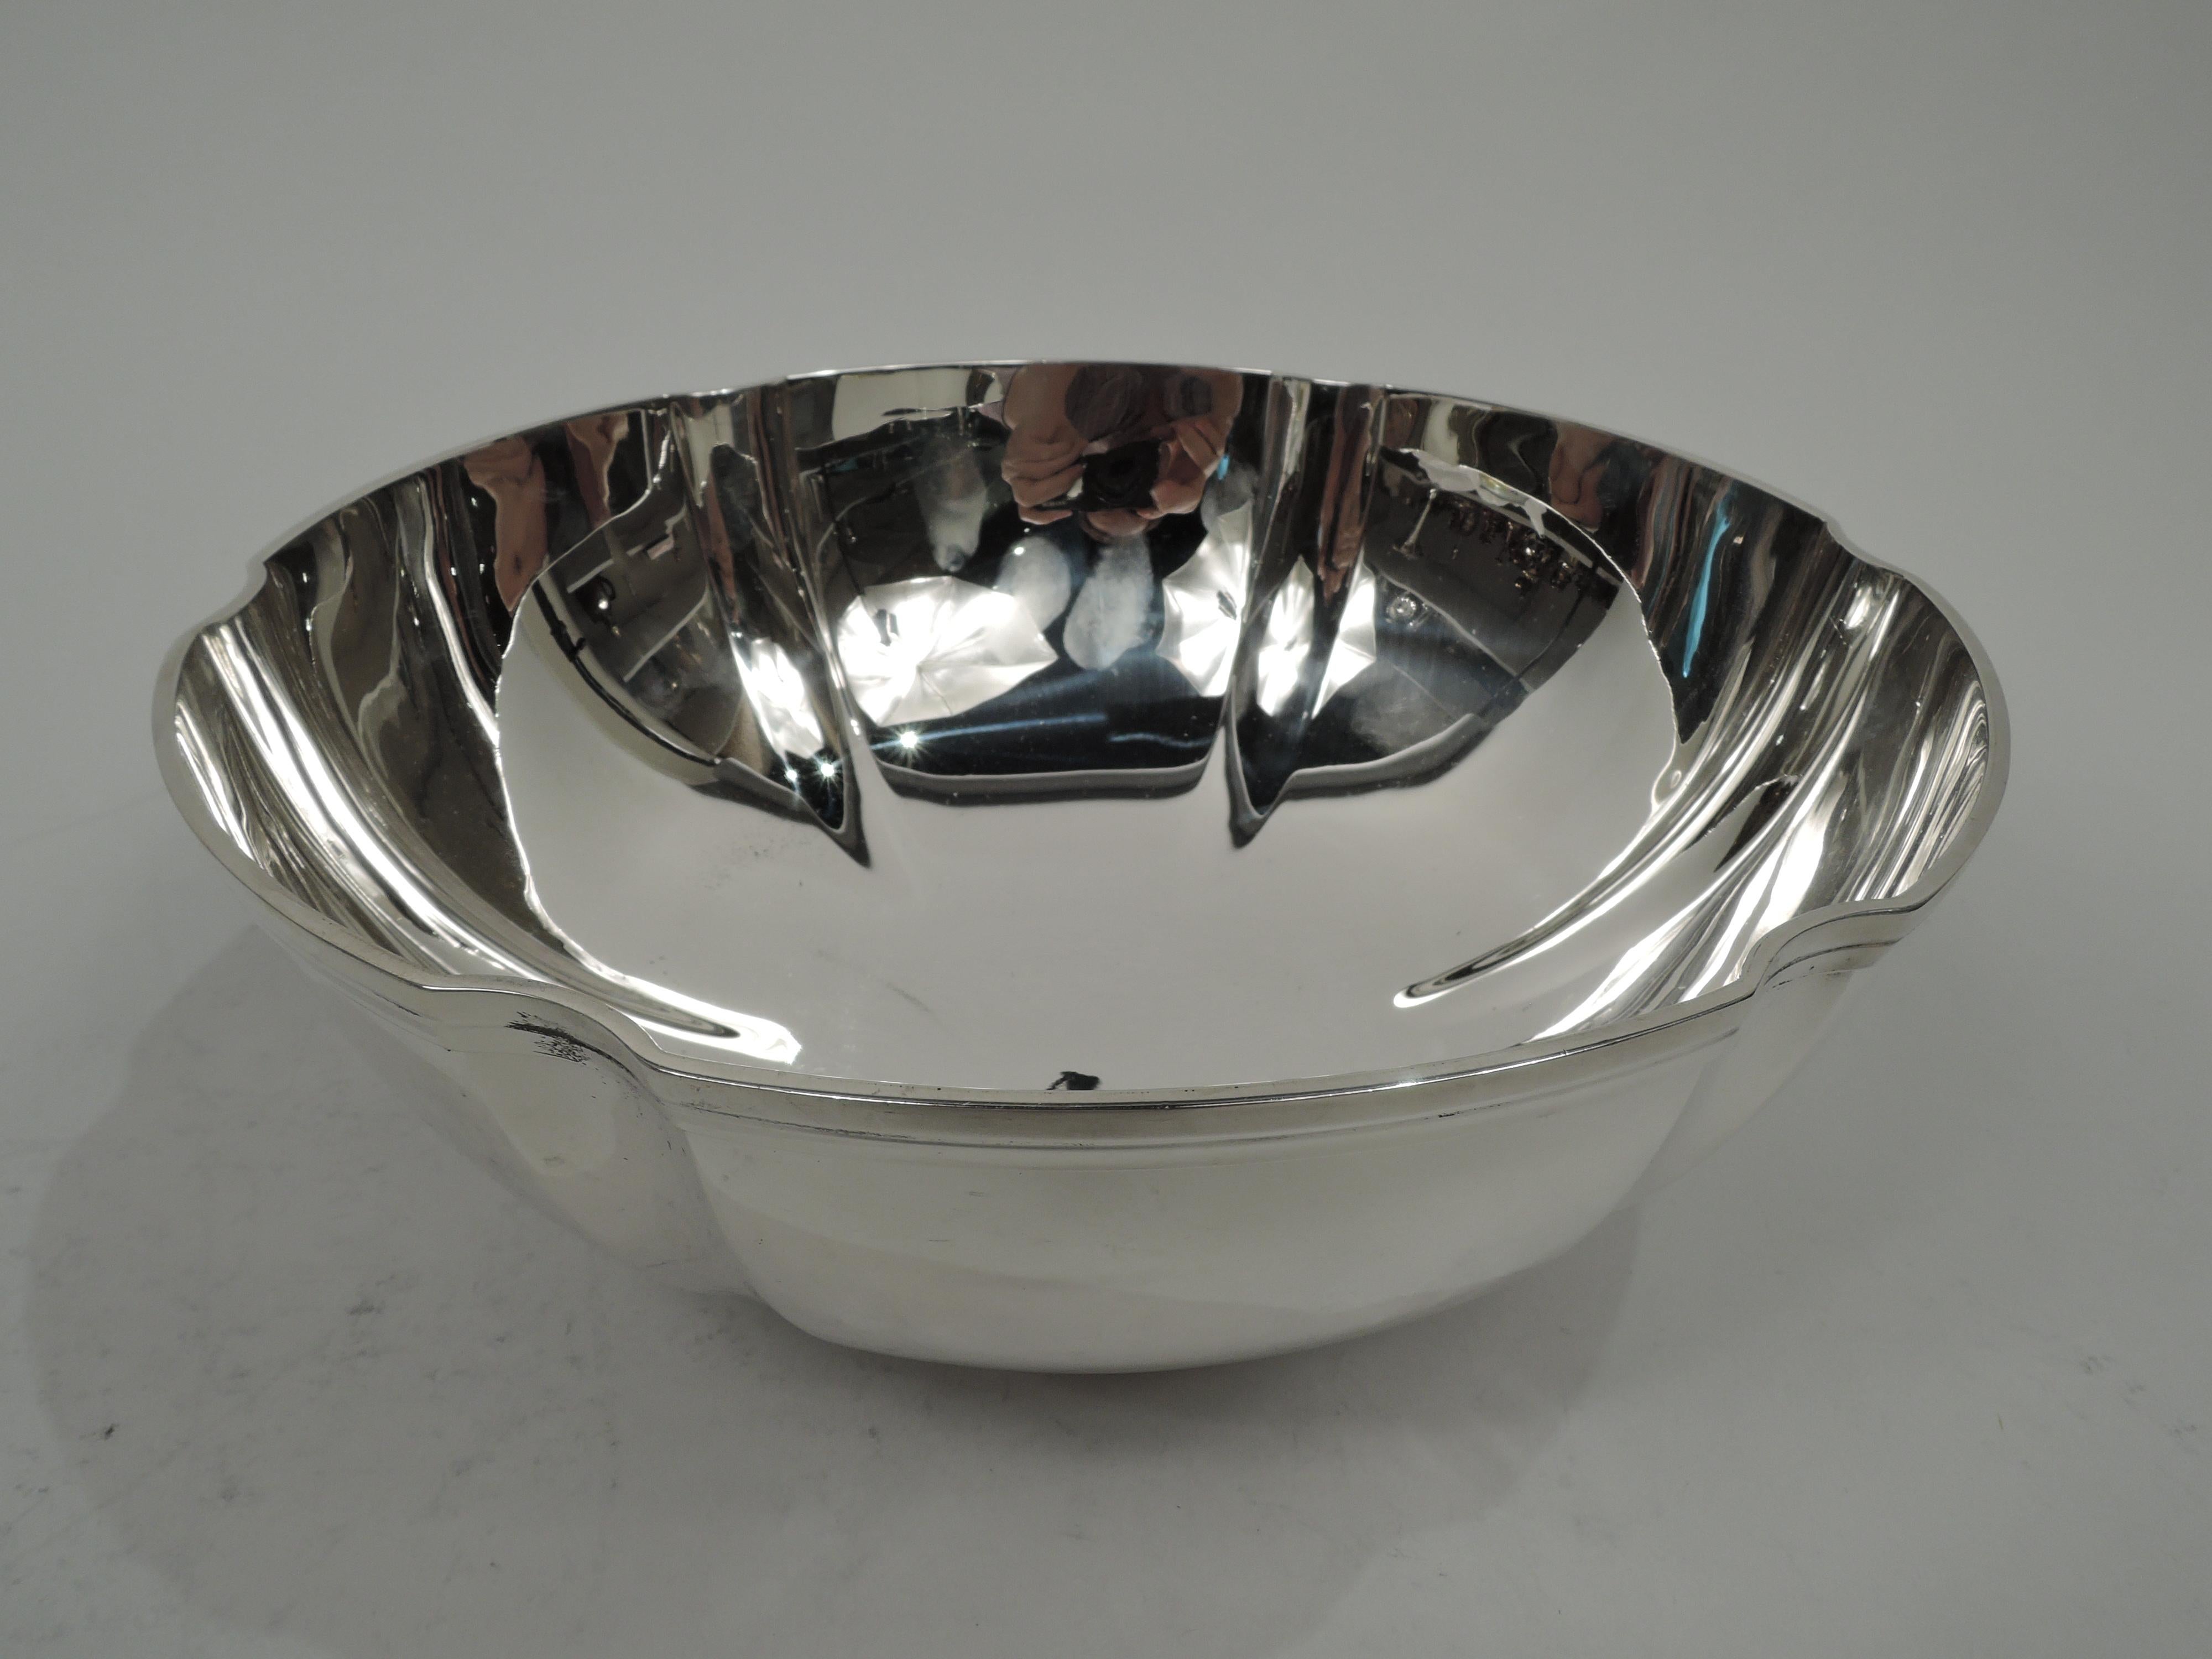 Modern sterling silver bowl. Made by Tiffany & Co. in New York, ca 1937. Round with curved and fluted sides. Rim flat and applied with incised band. Short foot ring with same. Fully marked including maker’s stamp, pattern no. 22392 (first produced